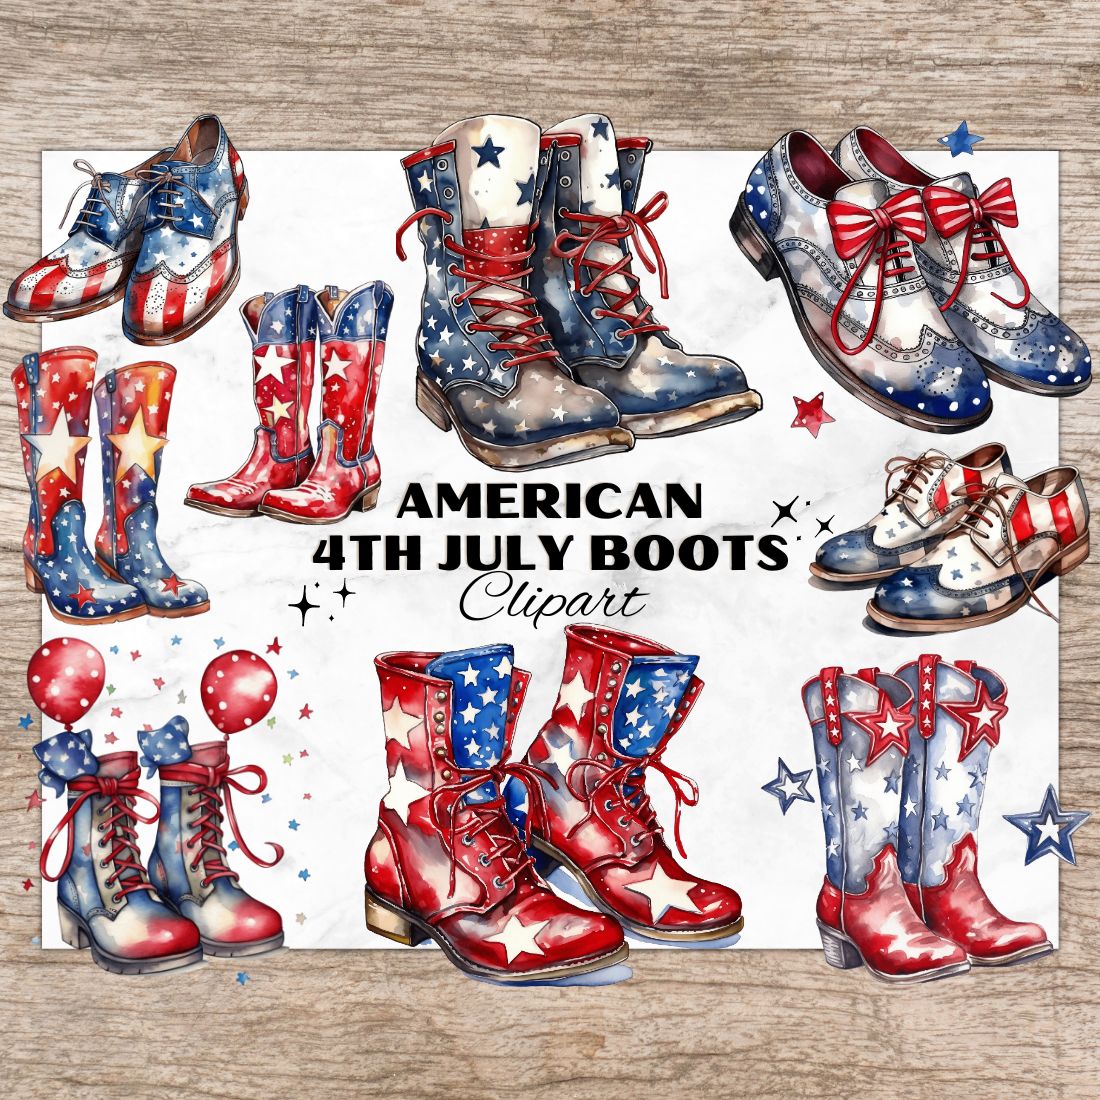 12 American Boots PNG, Watercolor Clipart, 4th of July, American Shoes, Transparent PNG, Digital Paper Craft, Illustrations, Watercolor Clipart For Scrapbook, Invitation, Wall Art, T-Shirt Design cover image.